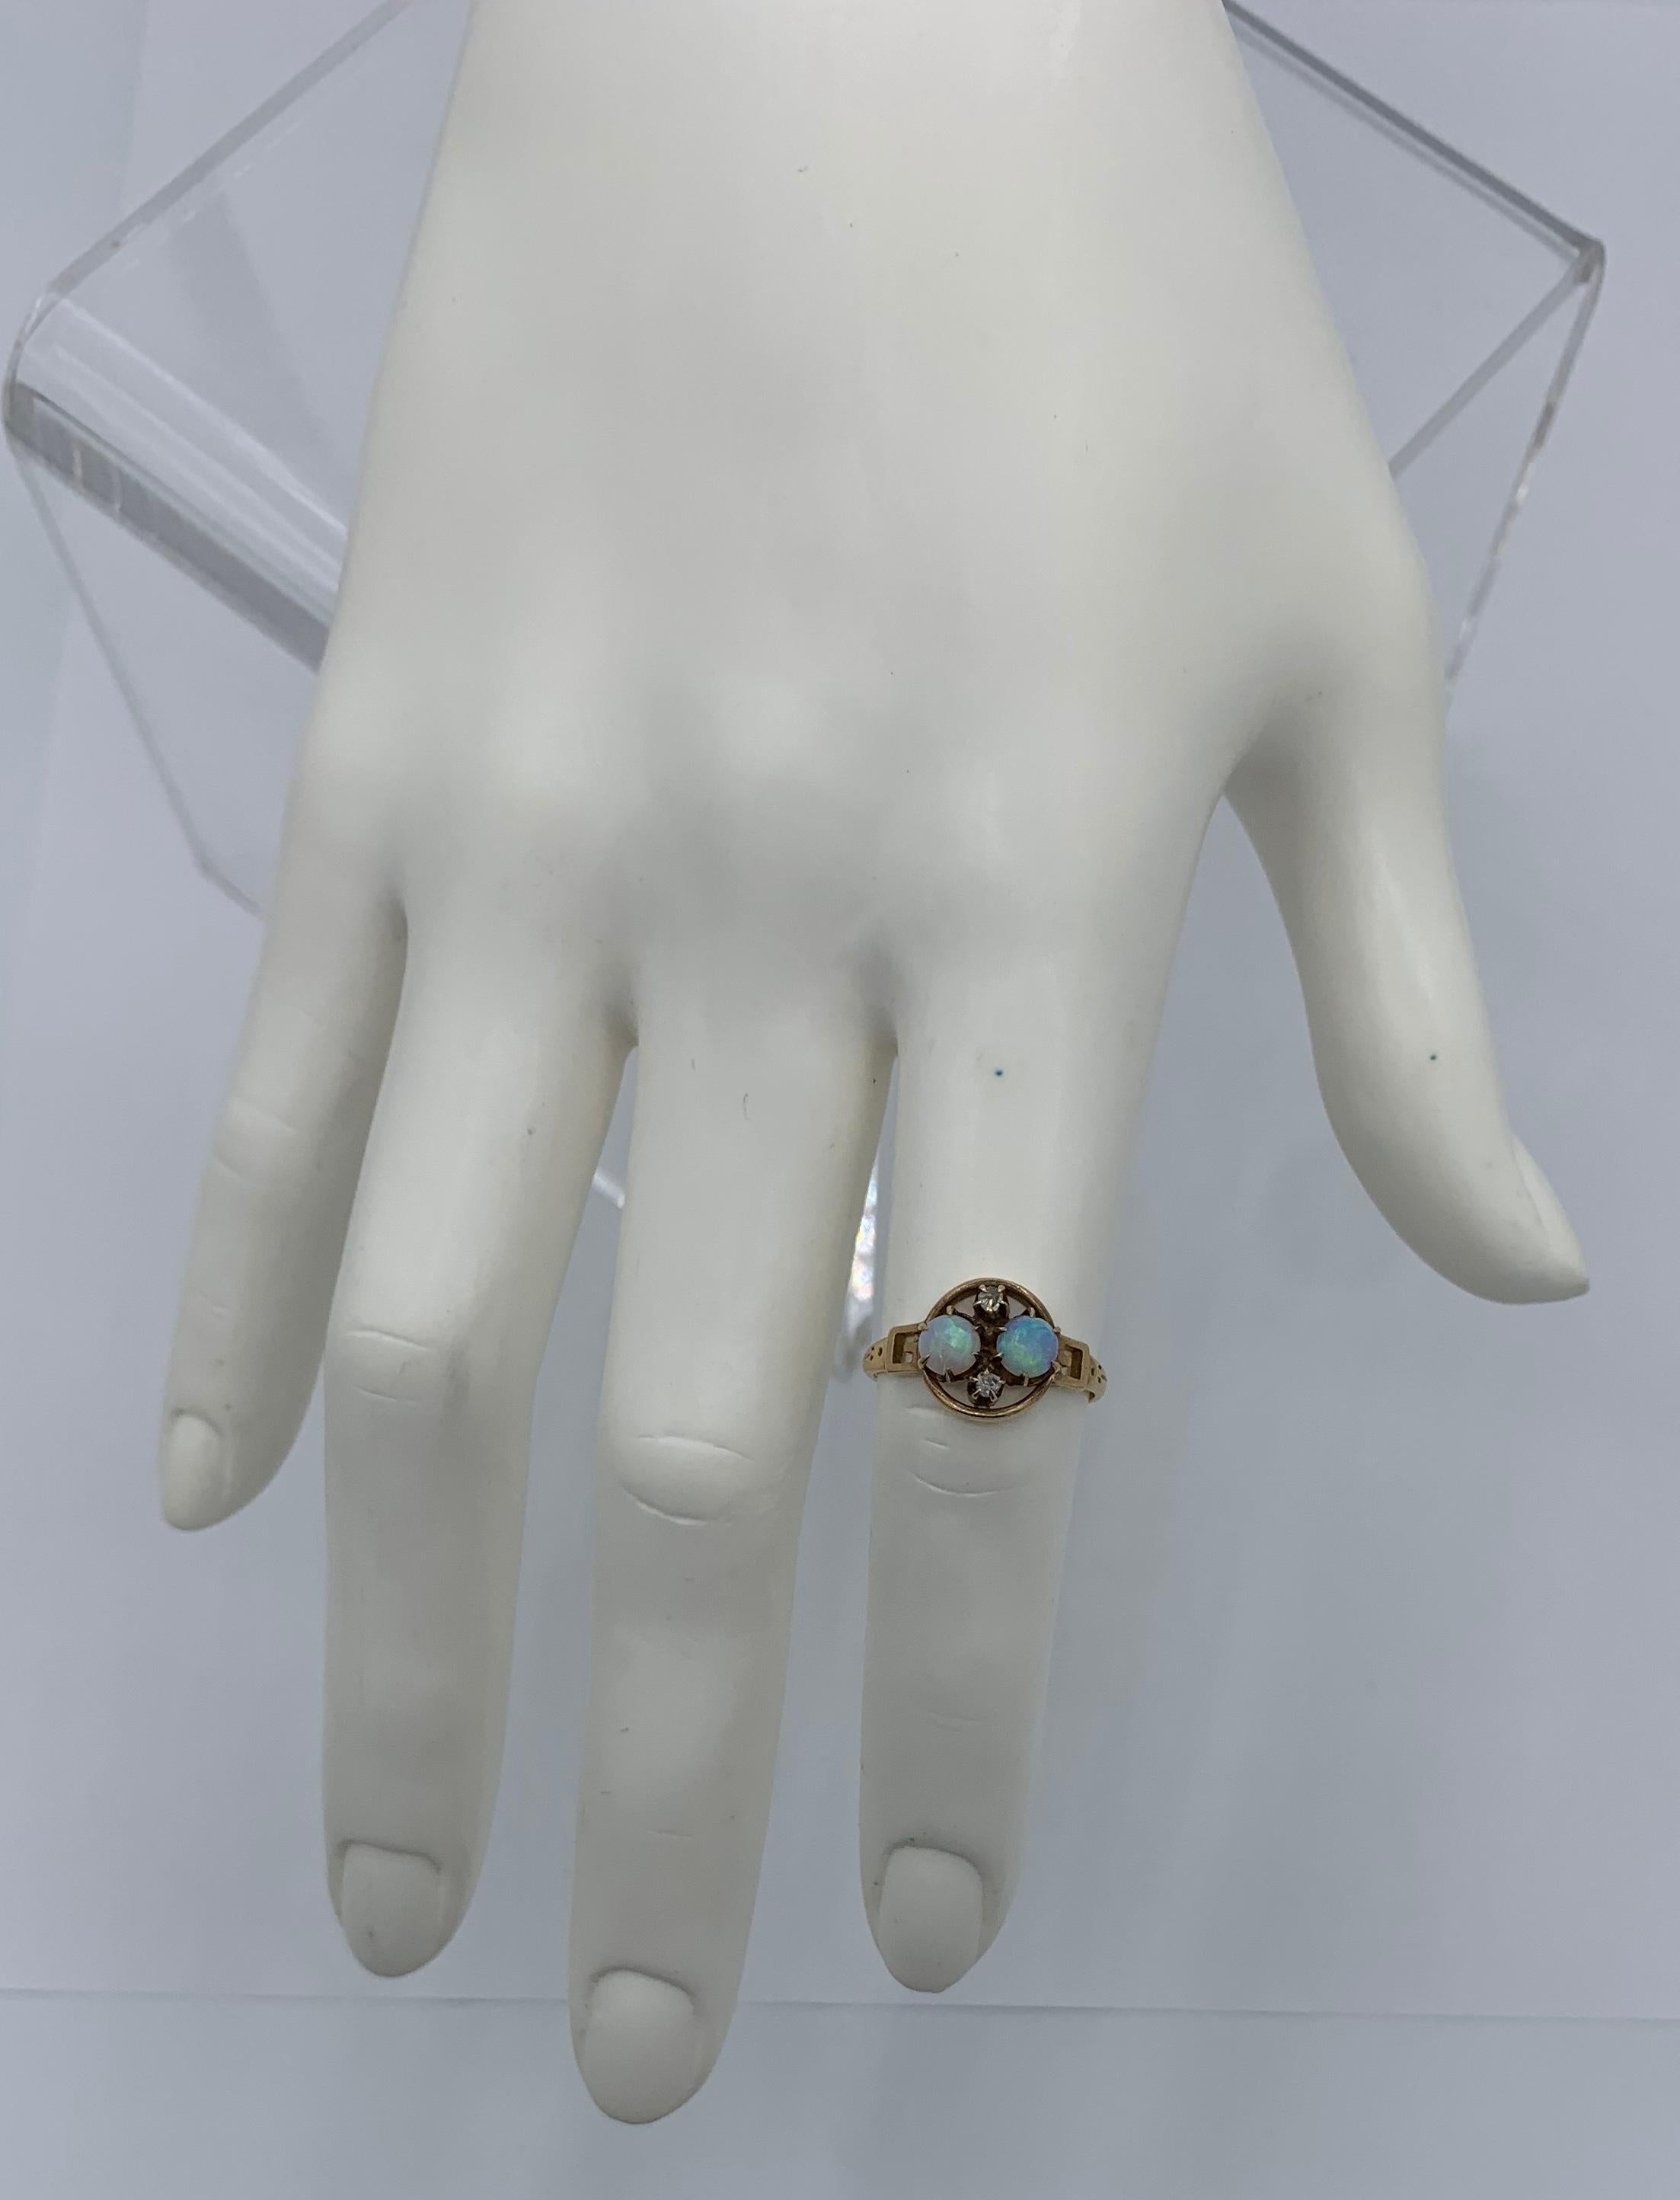 Art Deco Opal Diamond Ring Gold Antique Wedding Engagement Stacking Ring For Sale 2